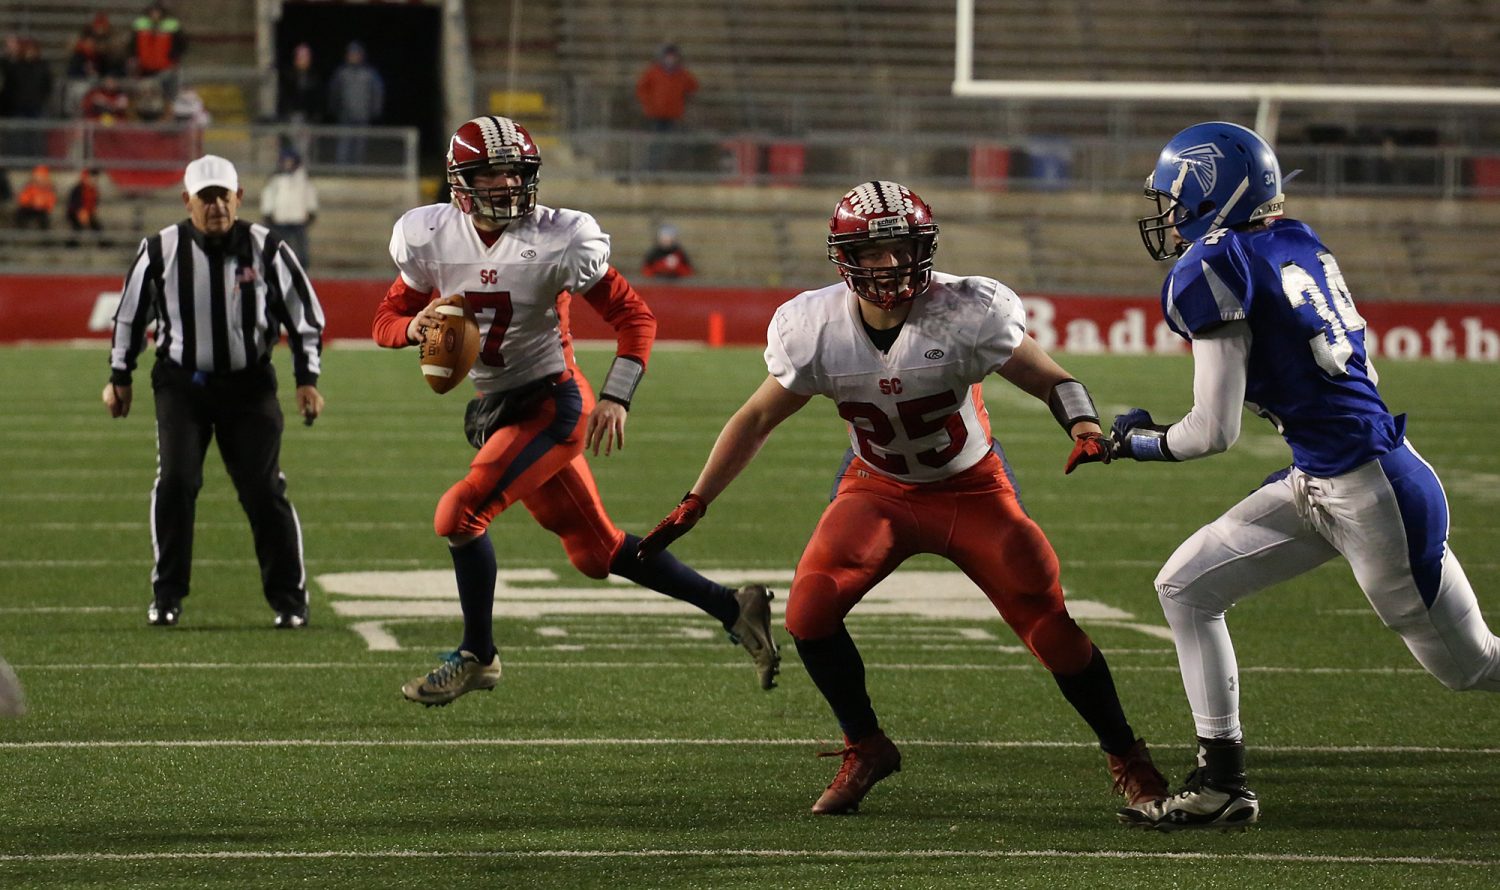 Spencer/Columbus quarterback Calvin Lenz rolls out on a 4th and goal play late in the first half as the Rockets lost to Amherst 42-0 in the WIAA Division 5 State Championship Game at Camp Randall Stadium in Madison, Thursday, Nov. 19, 2015. Lenz threw a desperation pass that was intercepted.